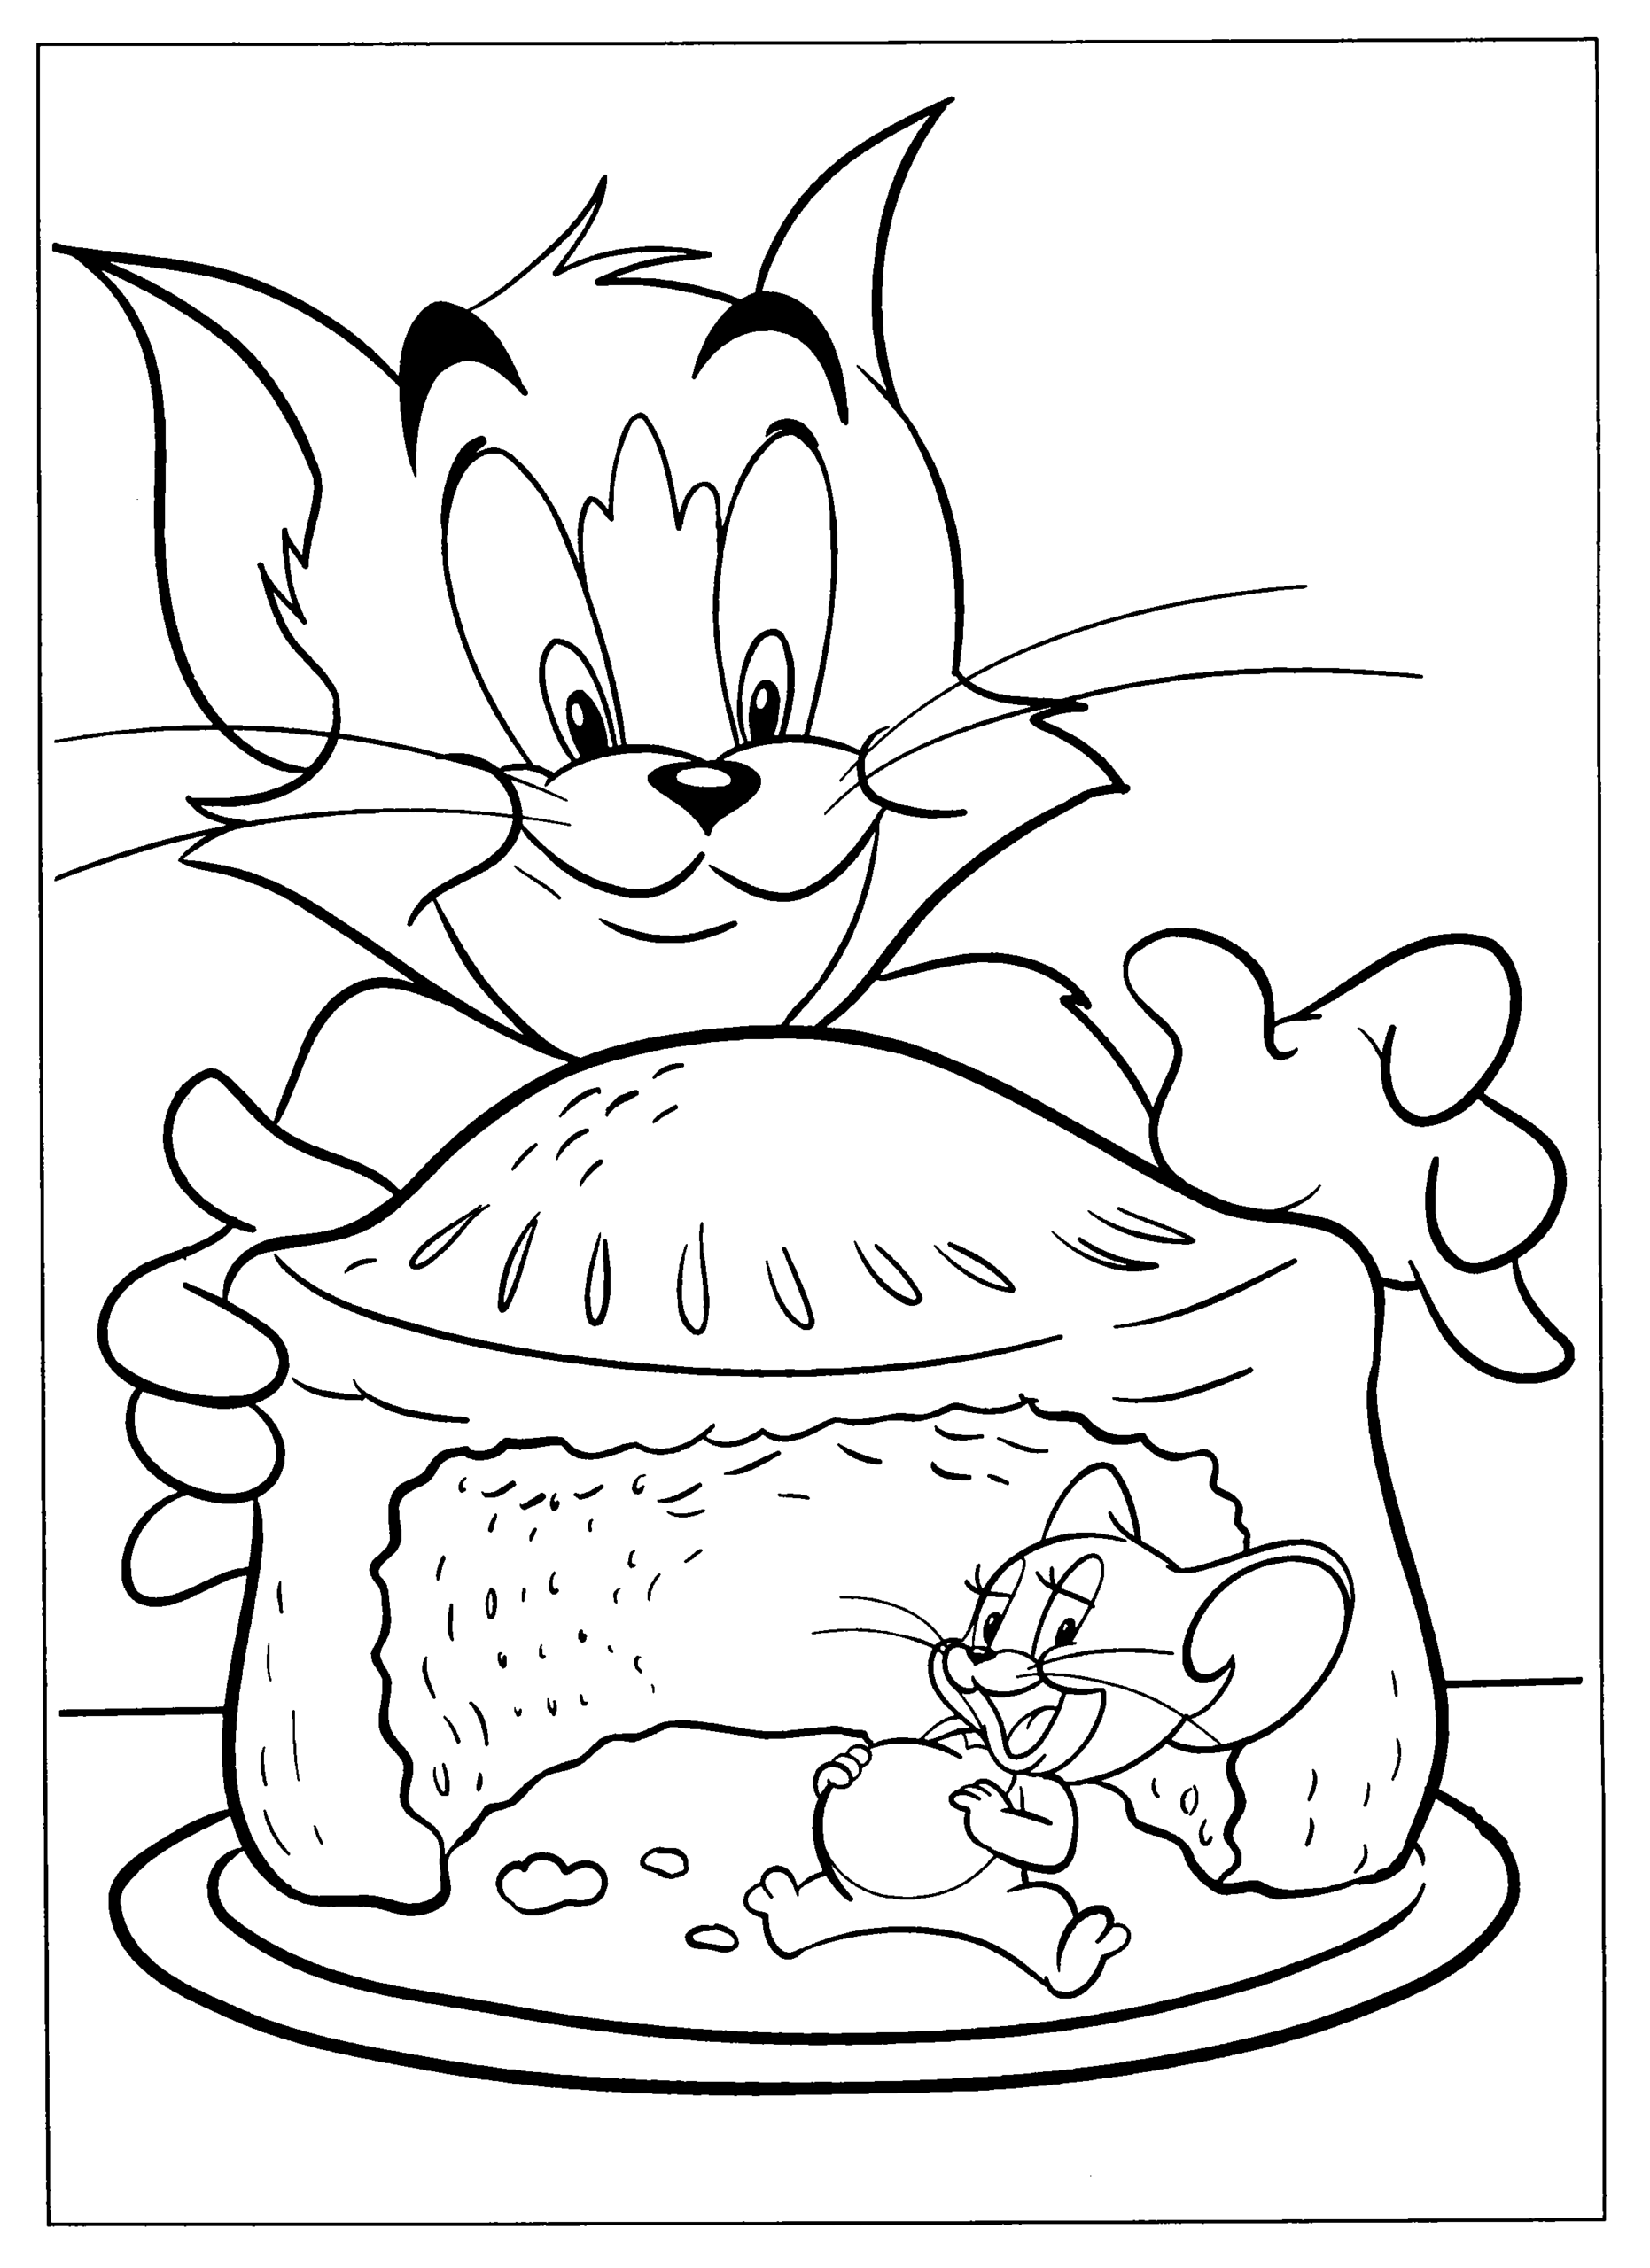 Tom and Jerry Coloring Pages TV Film Printable Tom and Jerry Printable 2020 10127 Coloring4free